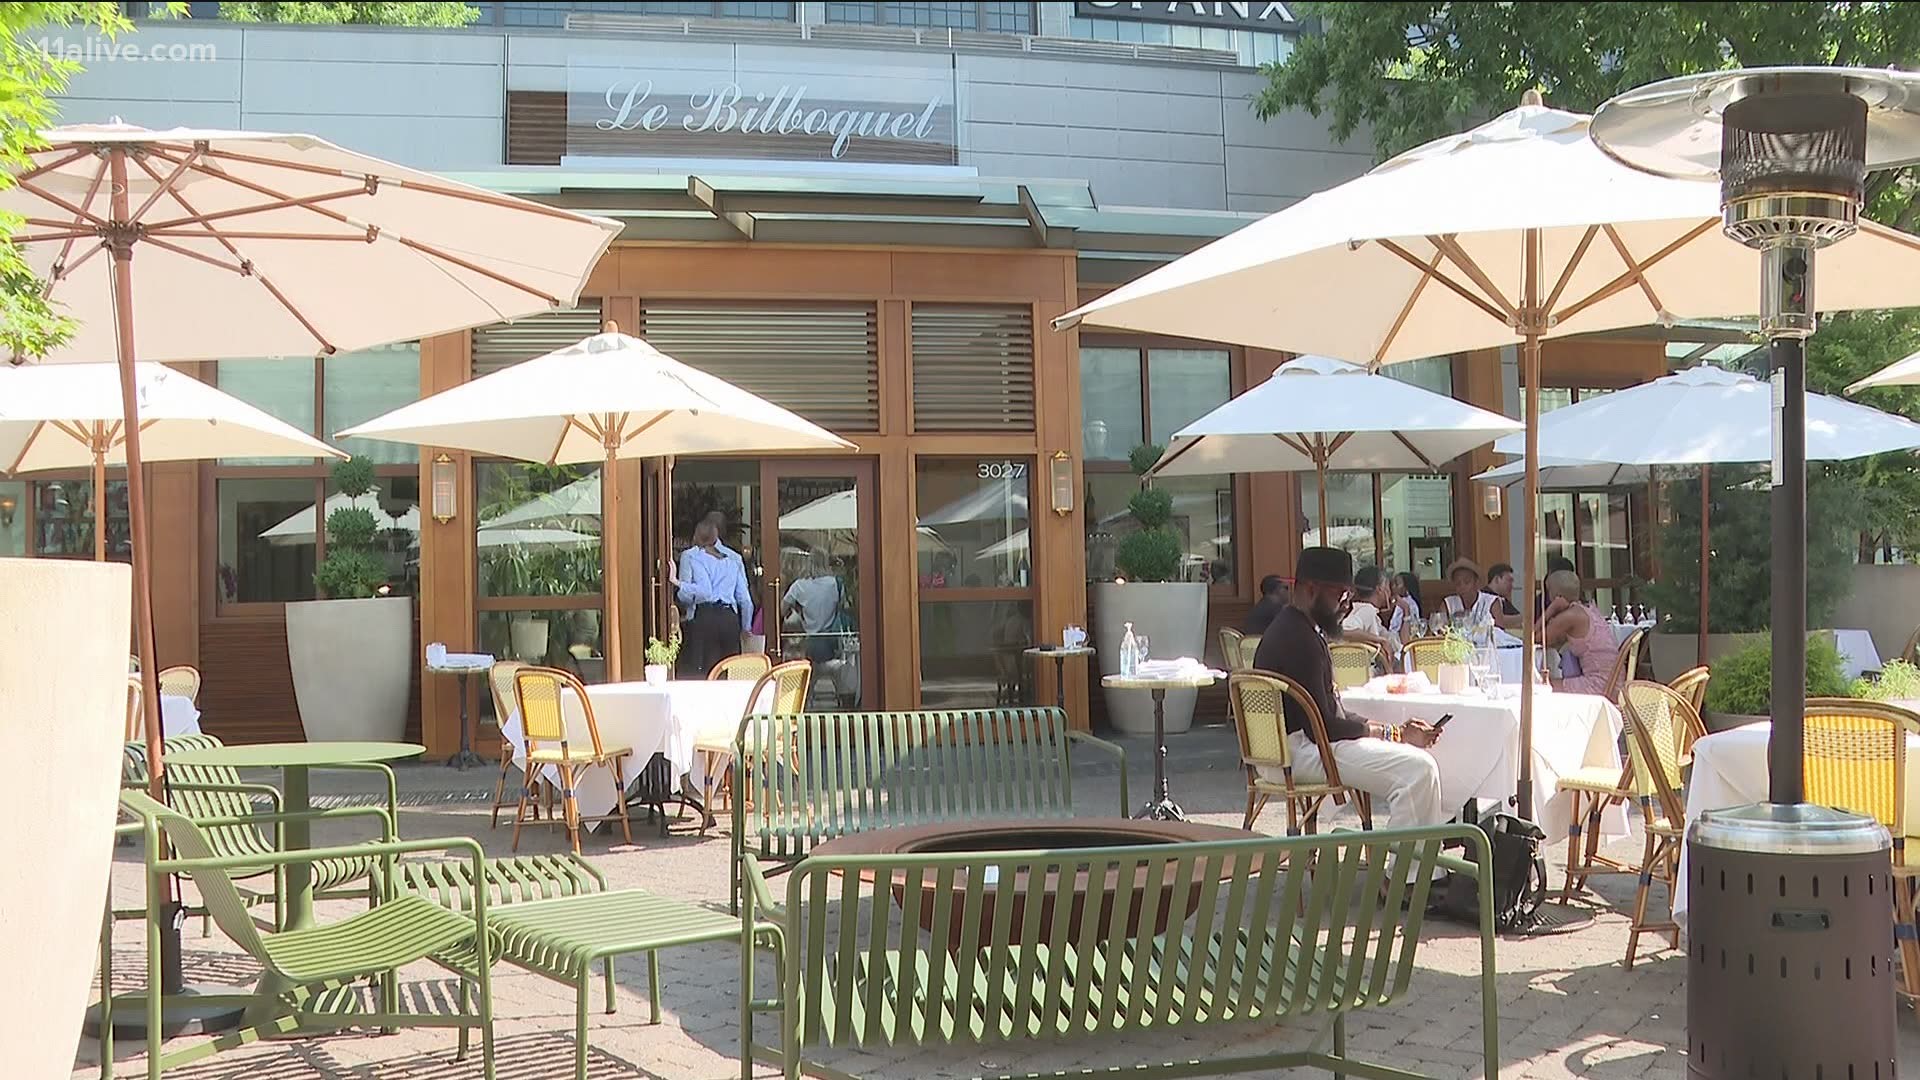 The disagreement took place at Le Bilboquet, a French bistro in the The Shops Buckhead Atlanta.